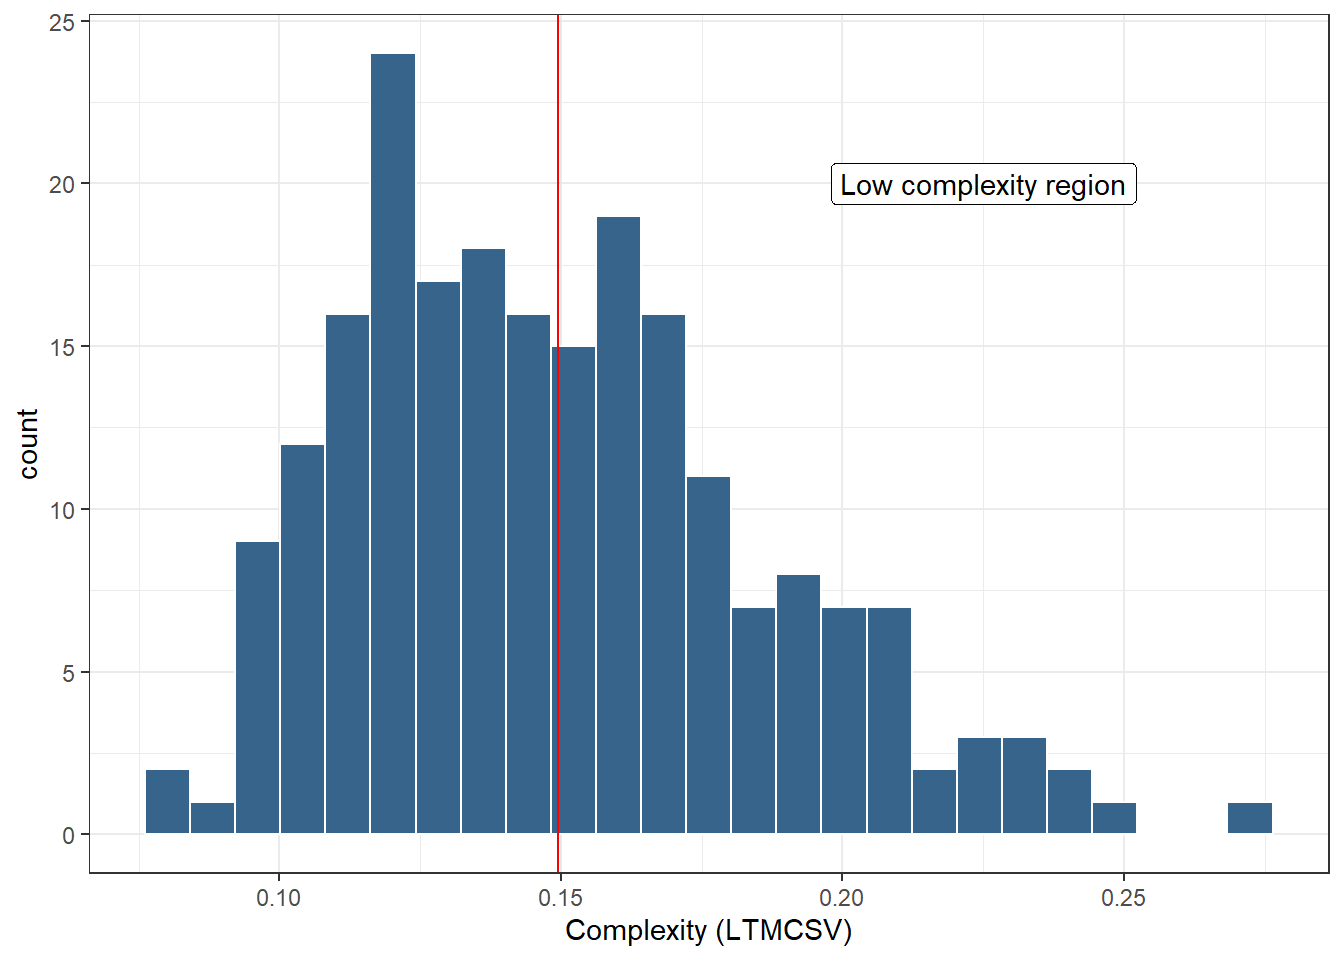 Histogram distribution of complexity (LTMCSV). The vertical red line represents the median complexity, which was used as a cut-off value separating high-complexity plans from low-complexity ones. LTMCSV increases as complexity decreases, therefore the area to the right of the red line corresponds to low complexity plans.